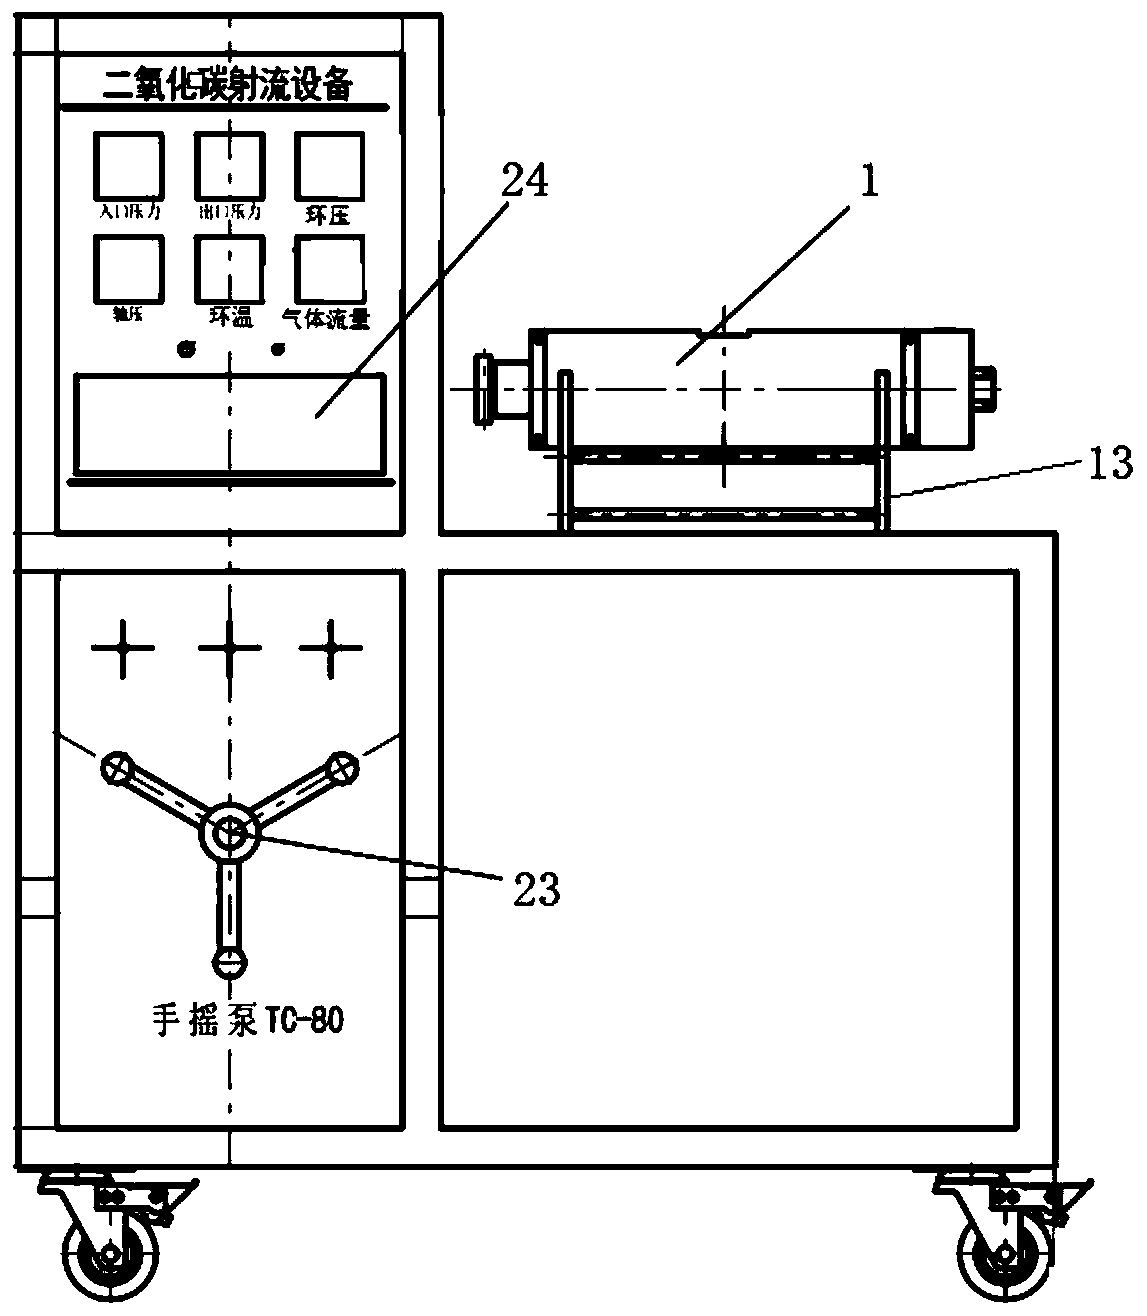 Comprehensive testing device and method for coal bed strain, seepage, displacement and flow jetting